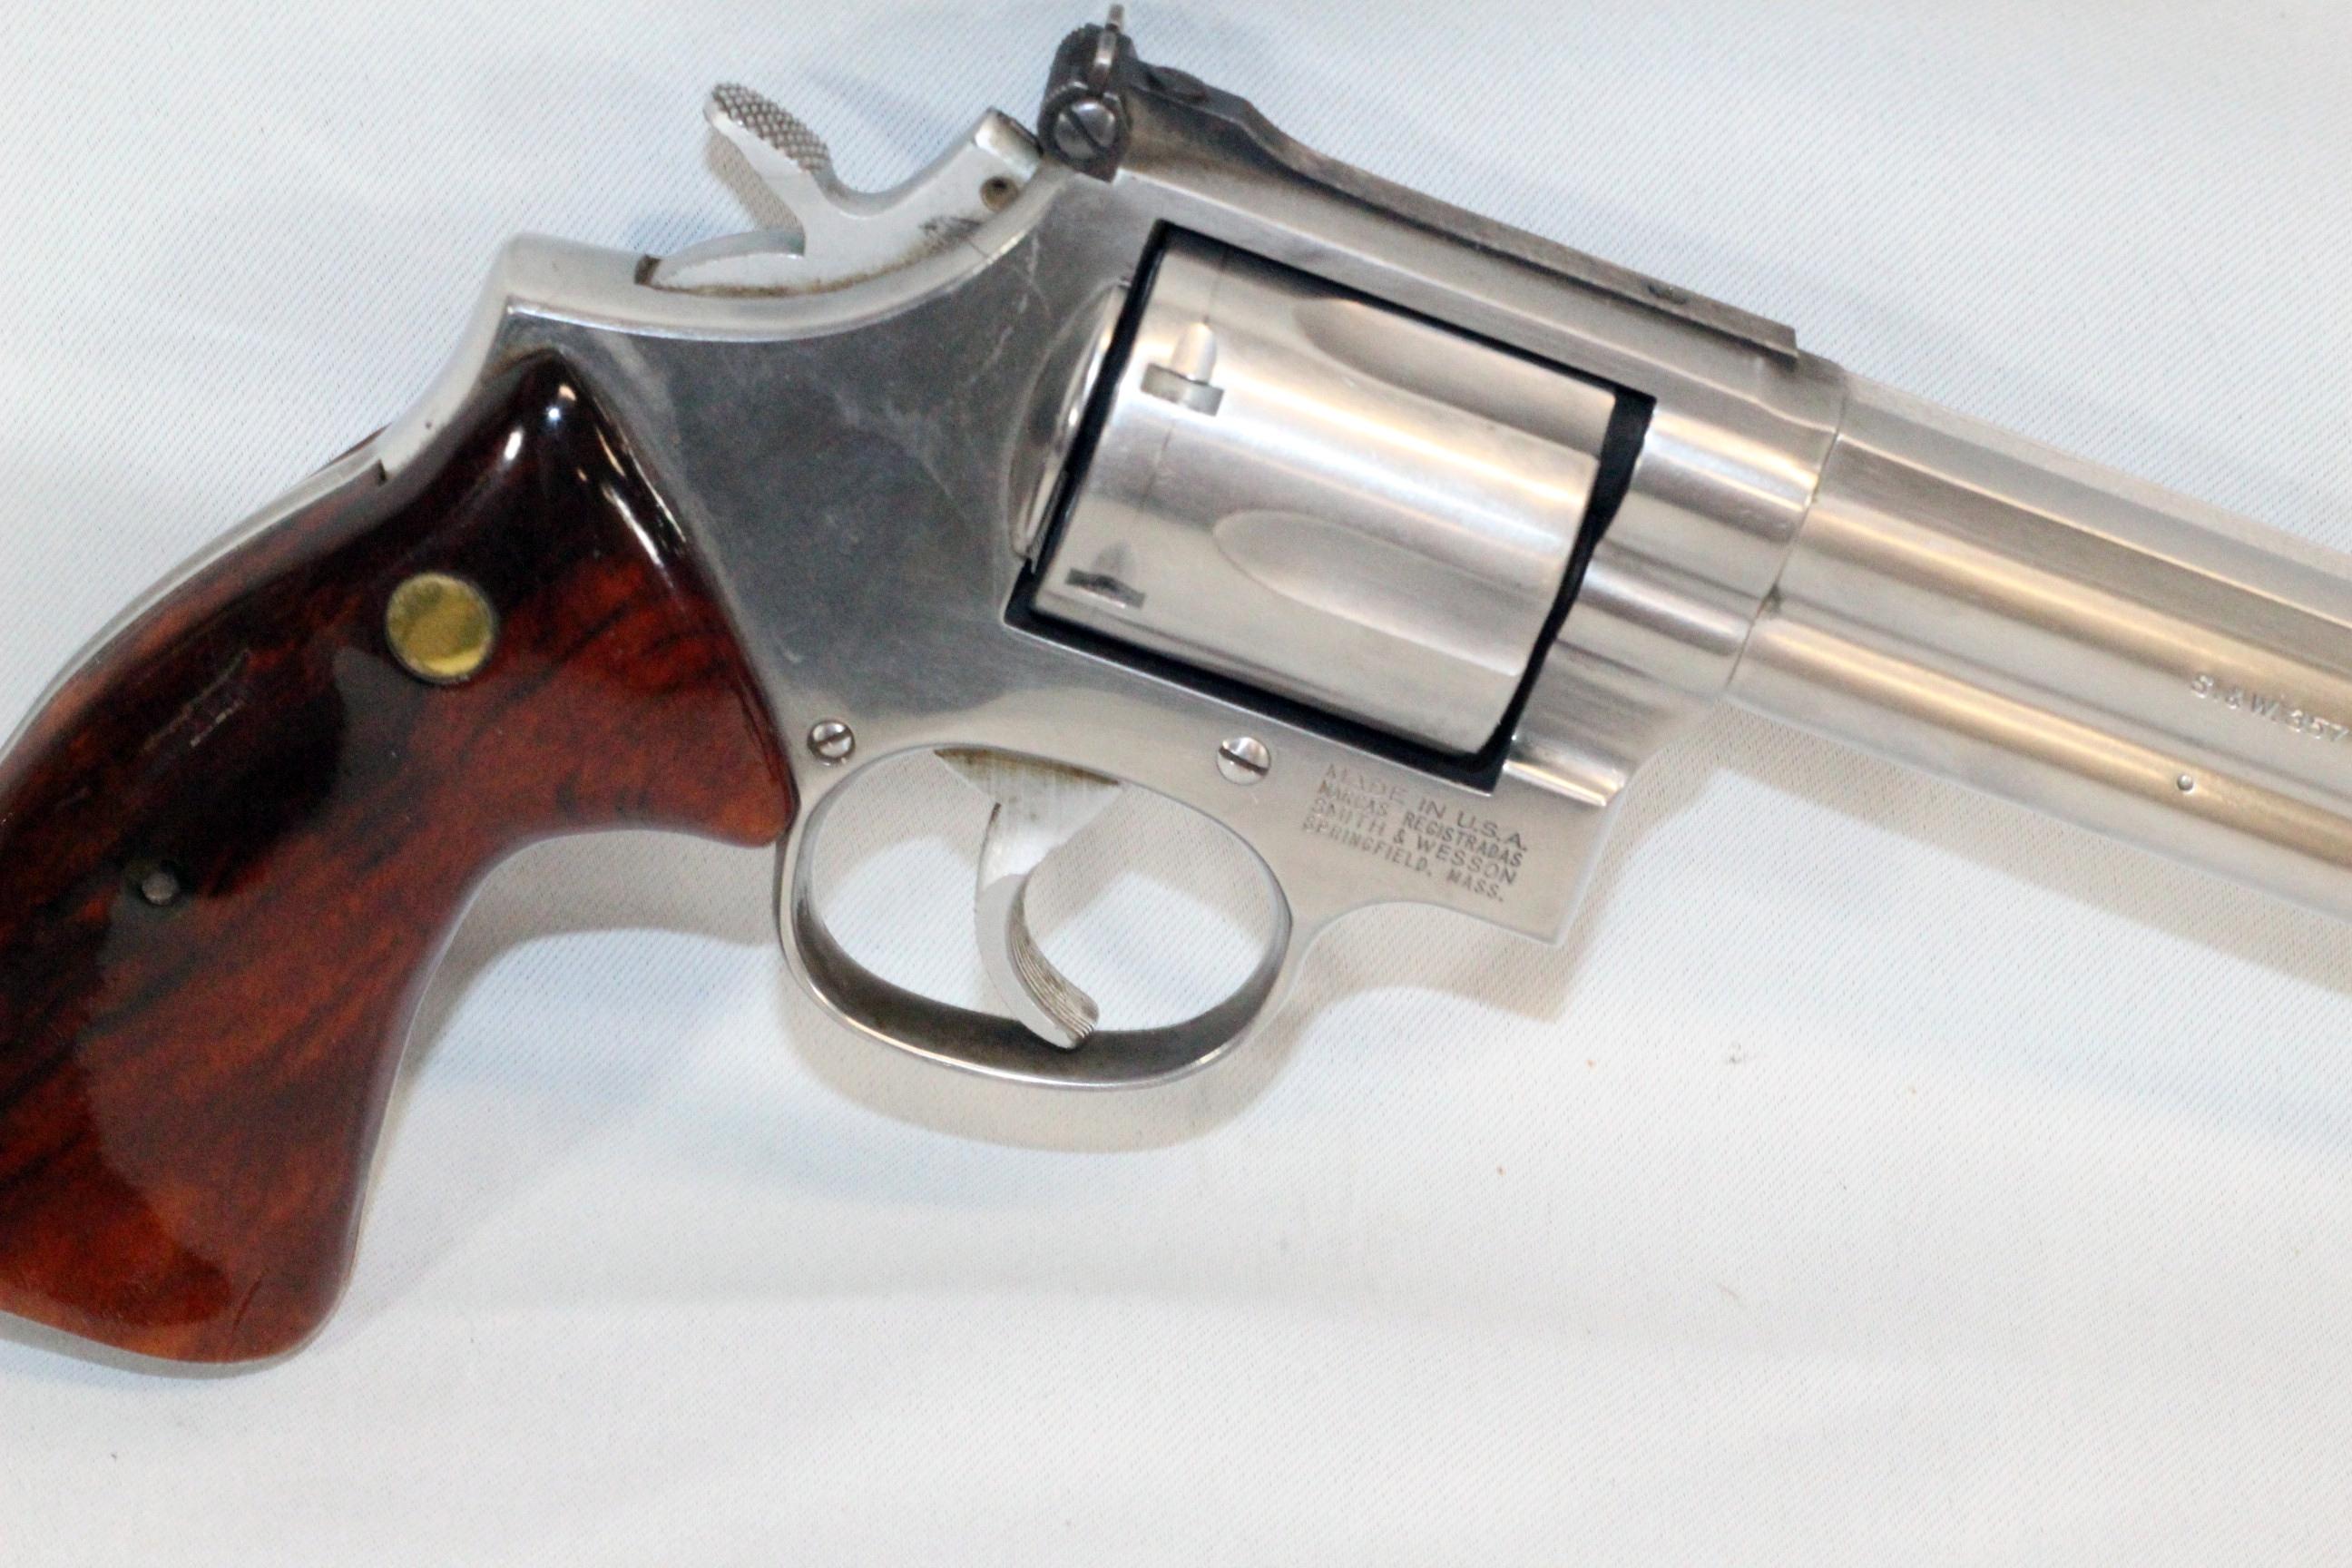 S & W .357 REVOLVER 8" BBL, CHROME WITH WOOD GRIP S/N BNW0813 WITH LEATHER WESTERN STYLE HOLSTER